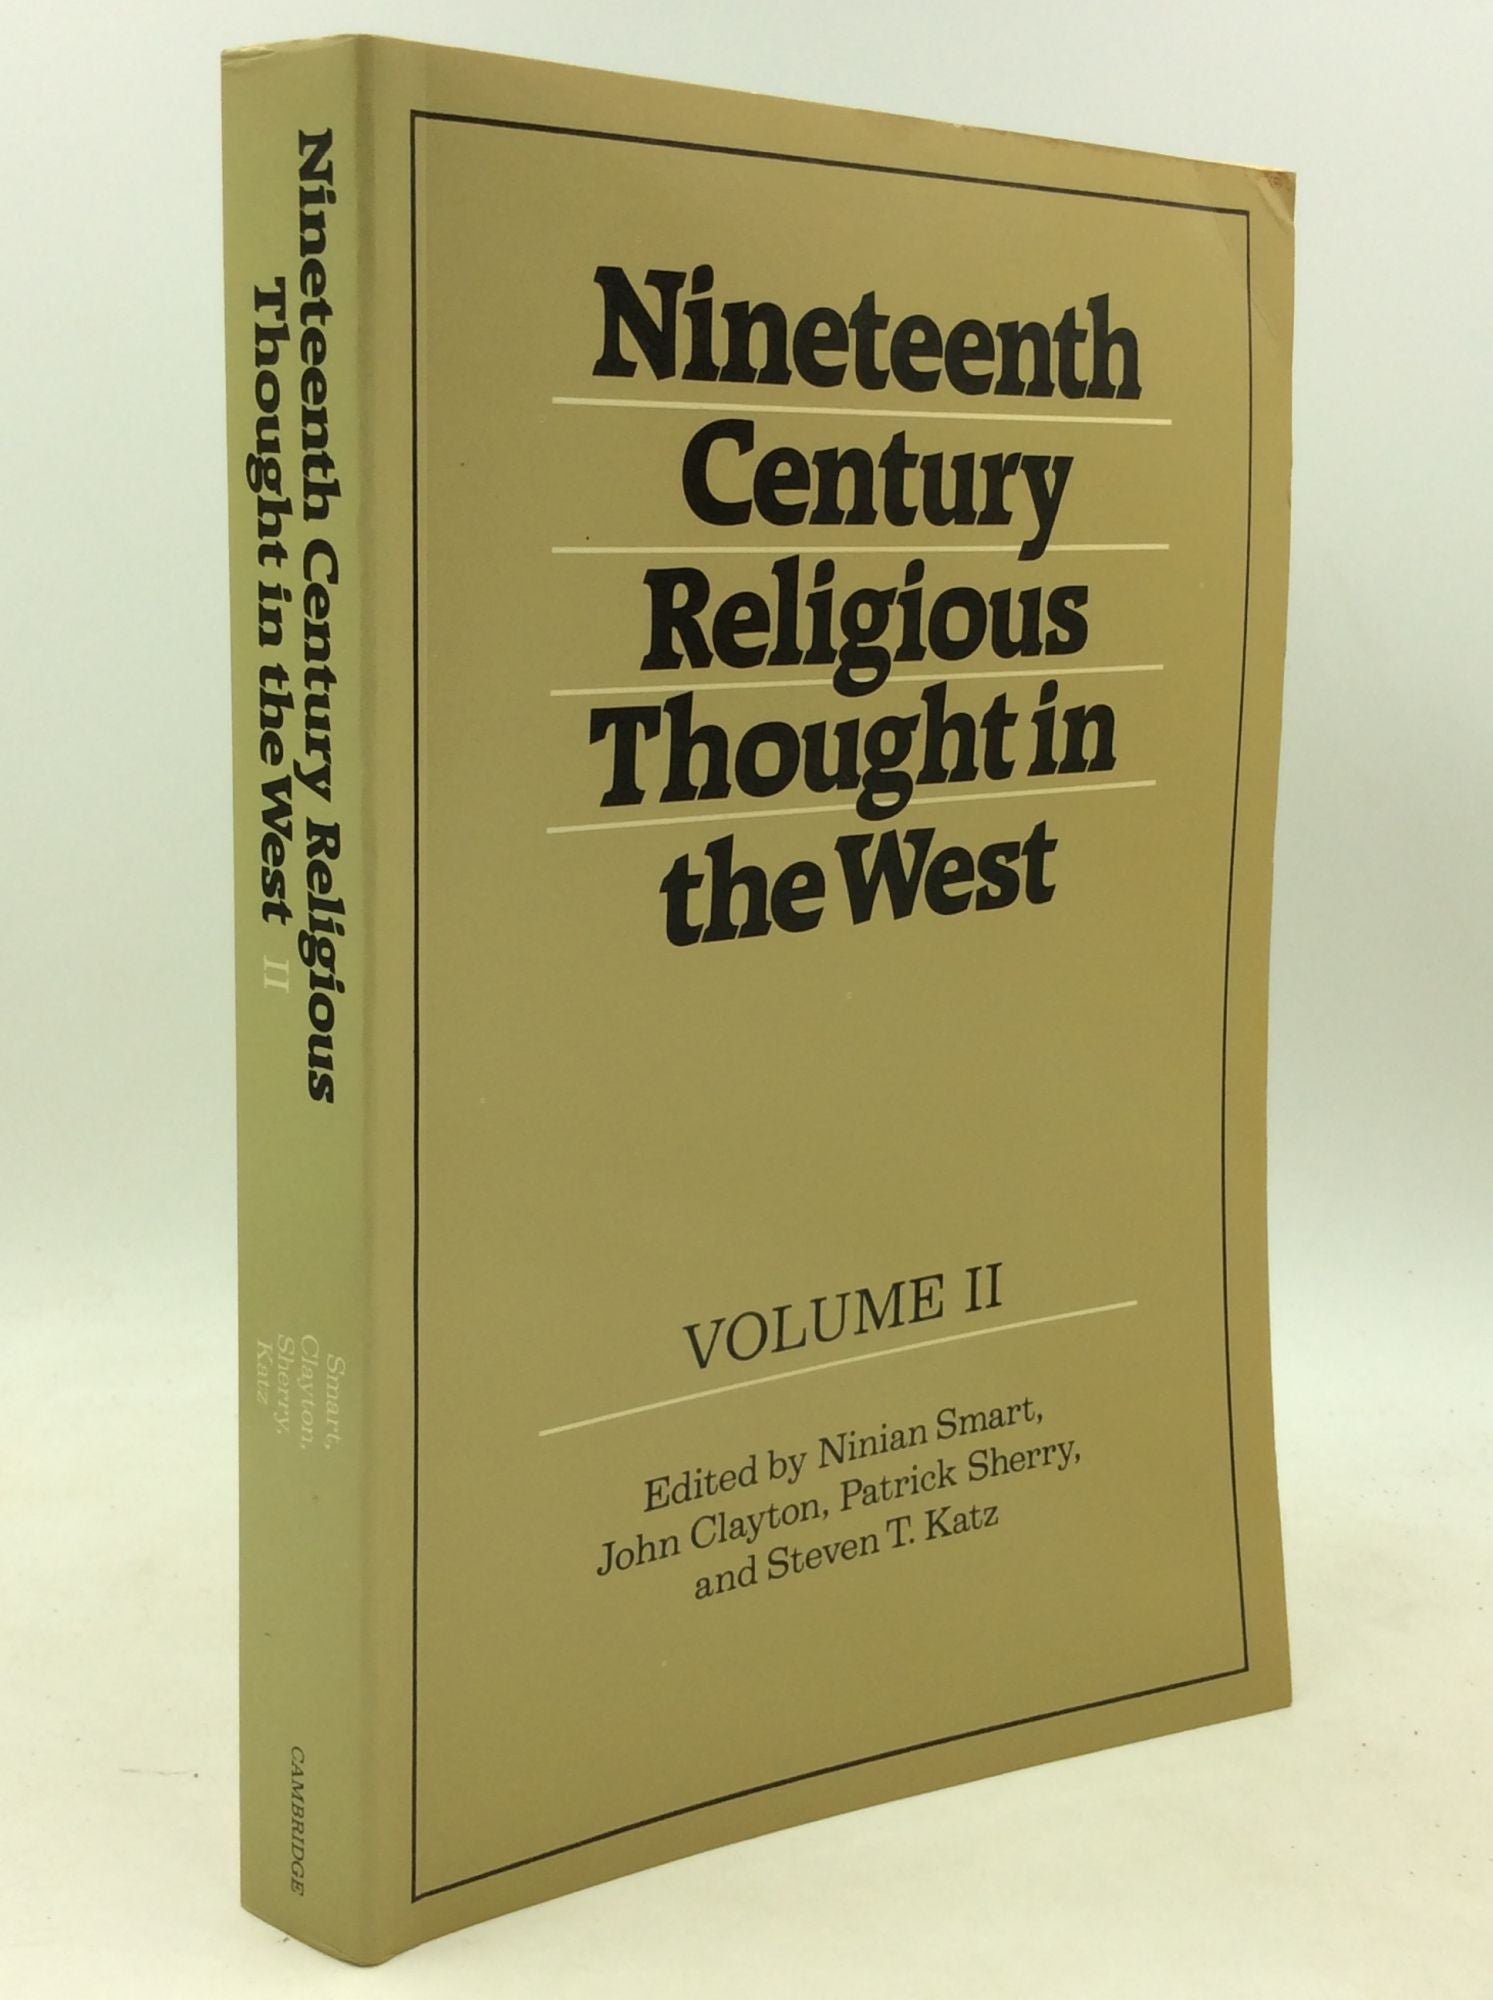 Ninian Smart, John Clayton, Steven T. Katz, and Patrick Sherry, eds - Nineteenth Century Religious Thought in the West, Volume II